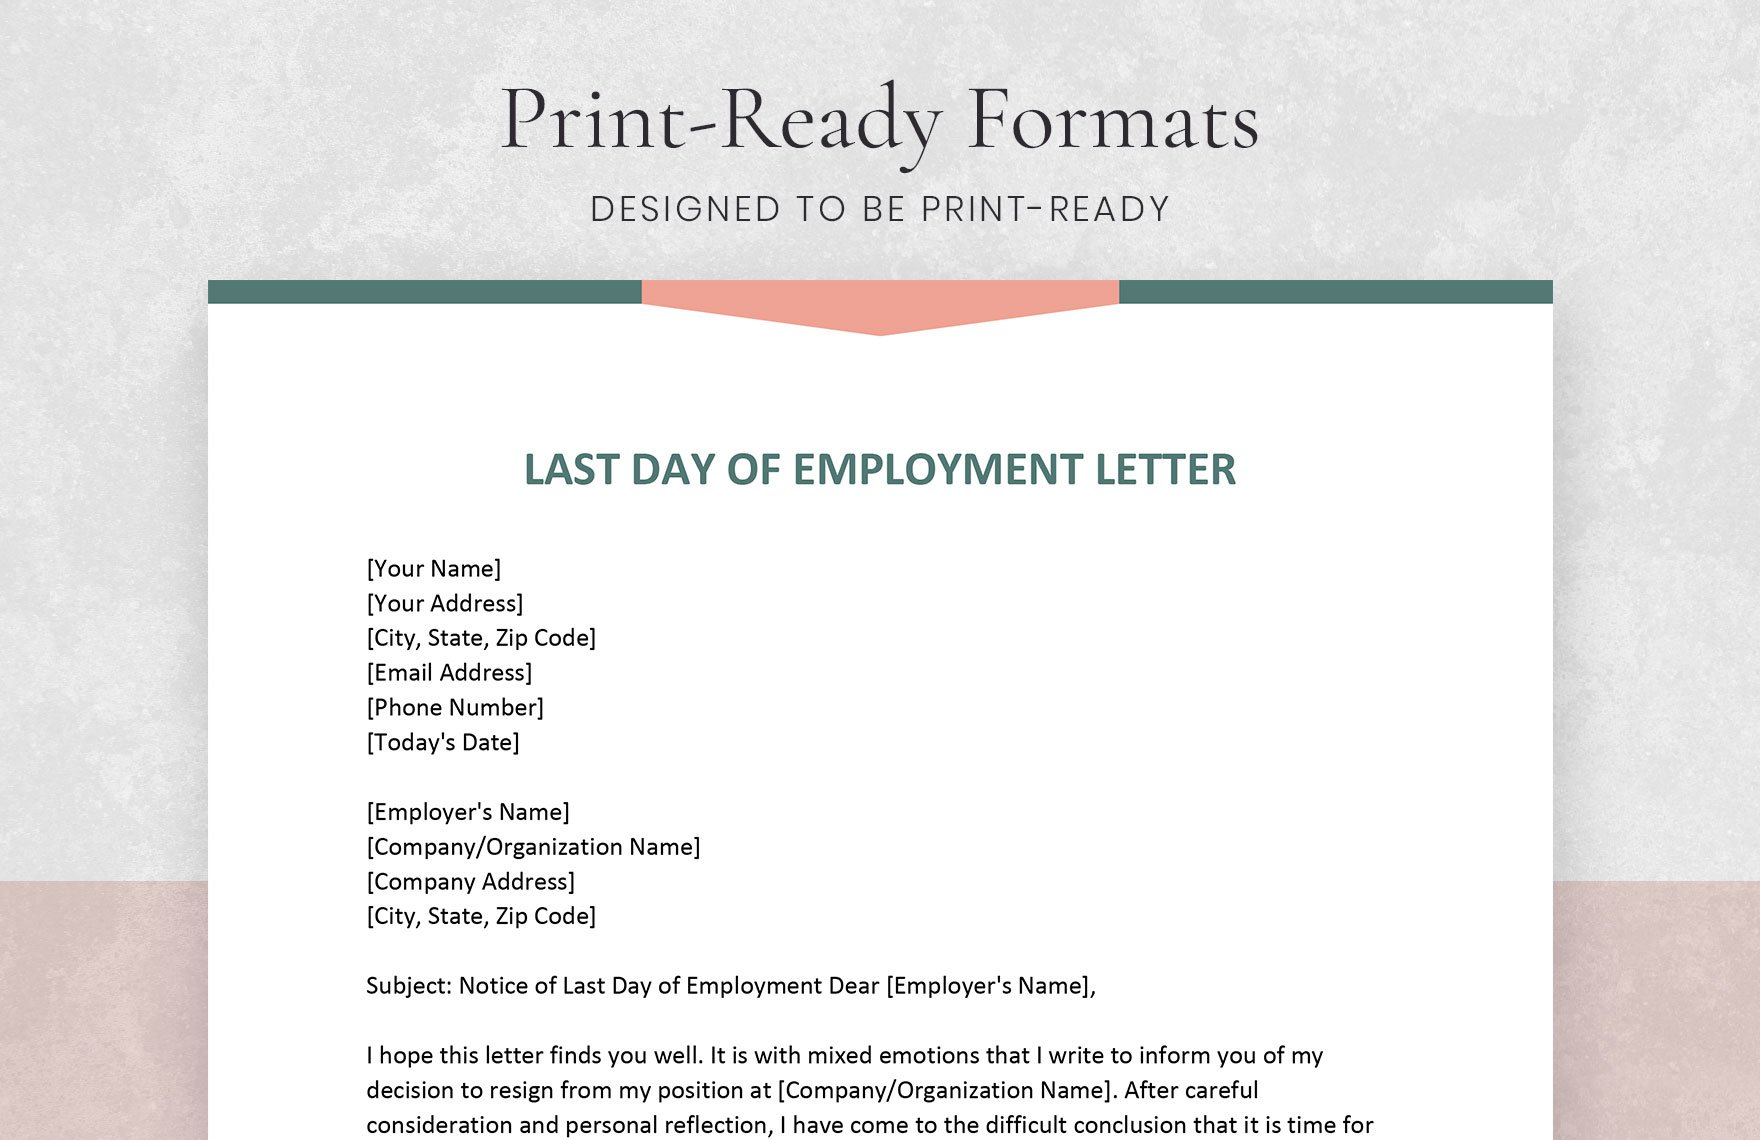 Last Day of Employment Letter